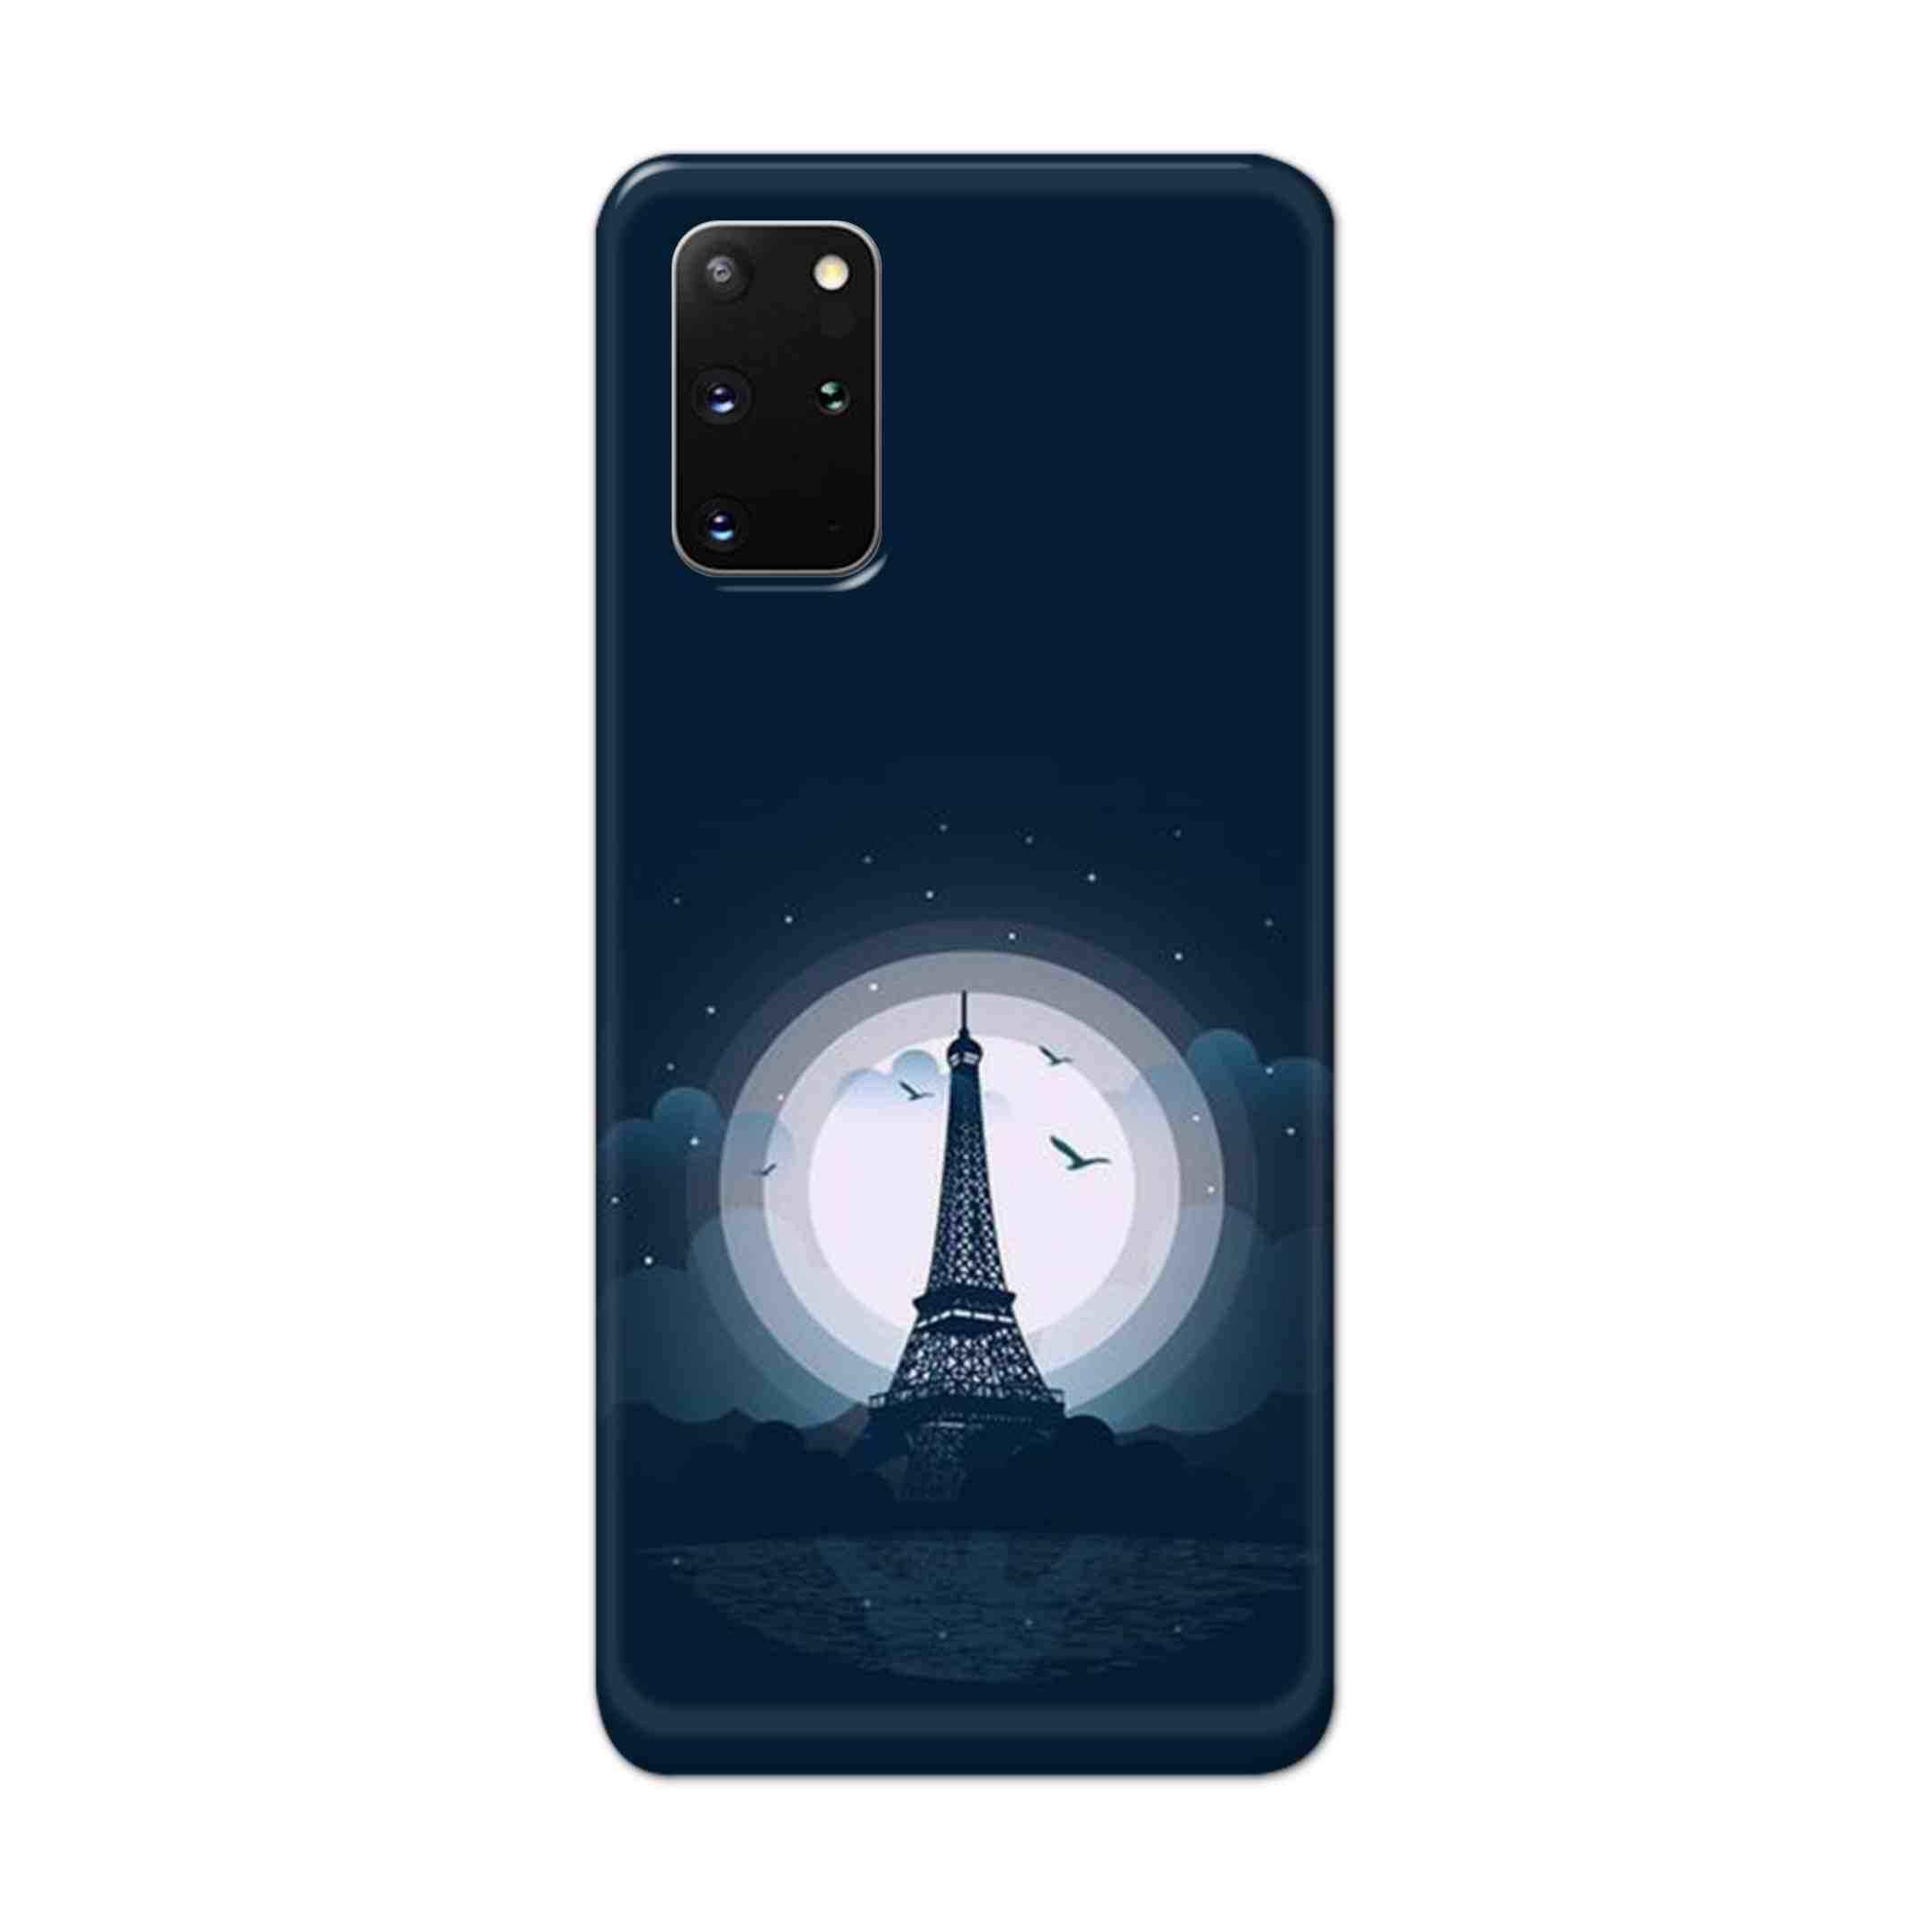 Buy Paris Eiffel Tower Hard Back Mobile Phone Case Cover For Samsung Galaxy S20 Plus Online